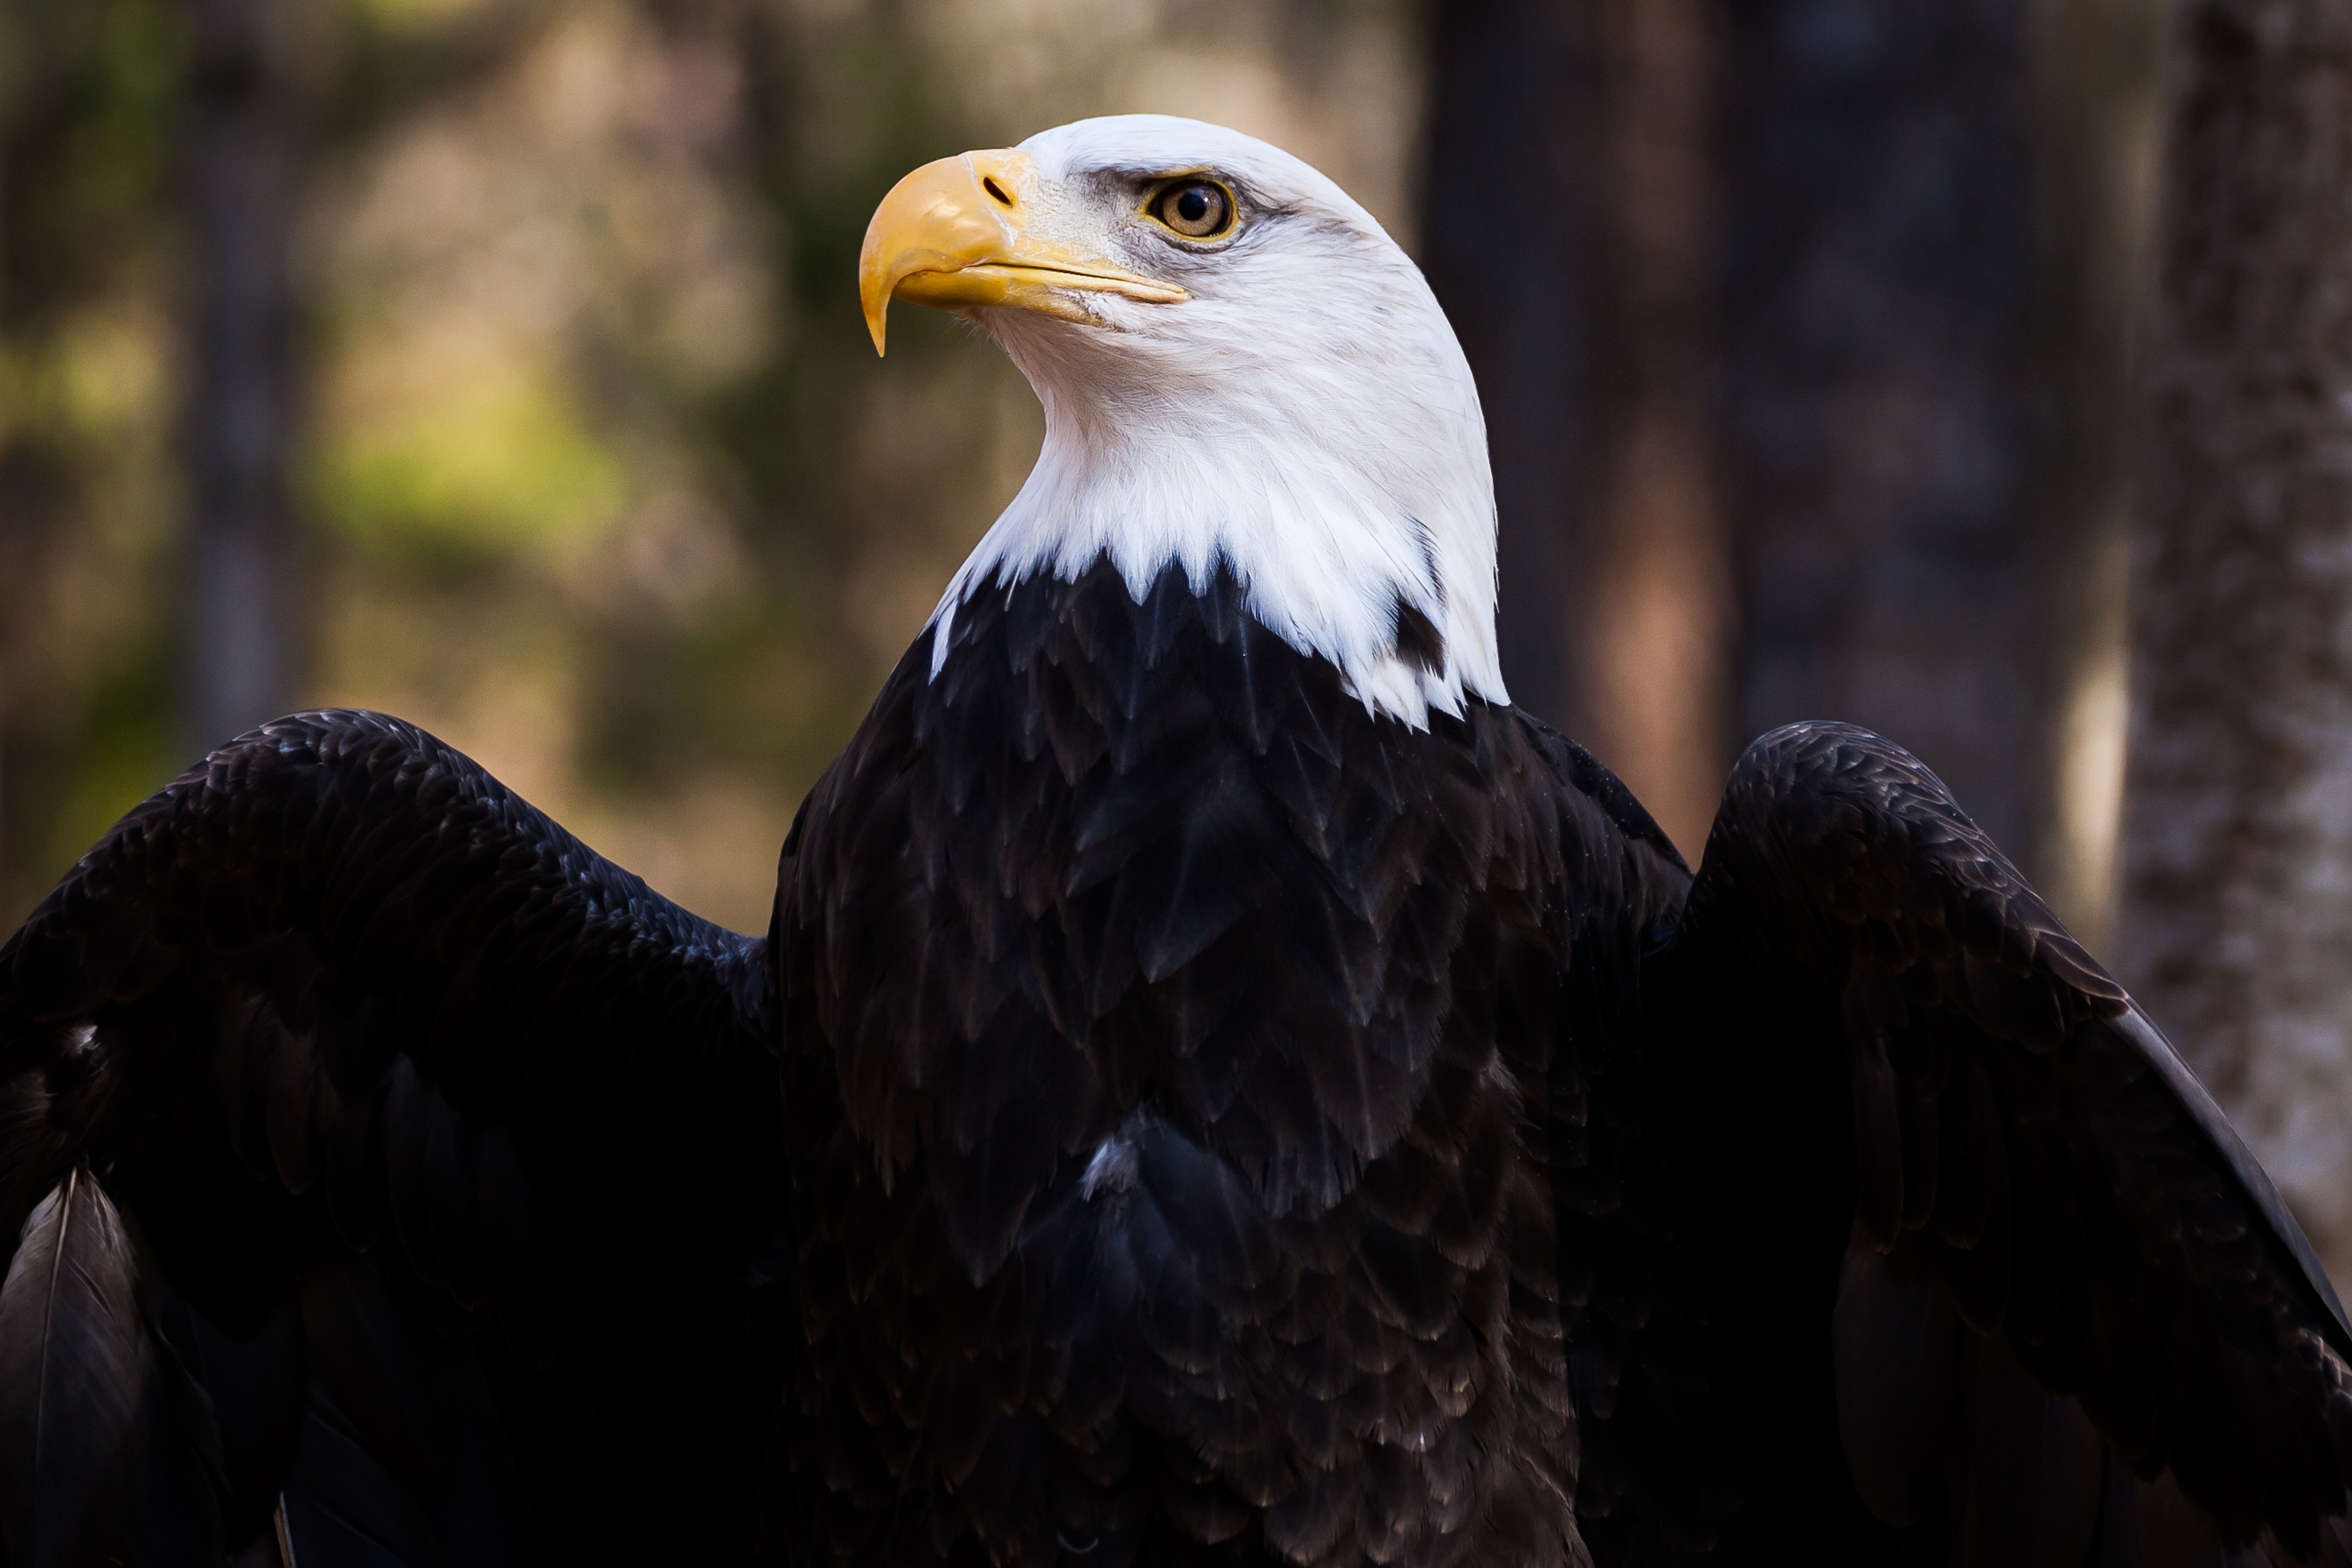 62047 download wallpaper beak, animals, feather, bird, predator, eagle, bald eagle, white-headed eagle screensavers and pictures for free